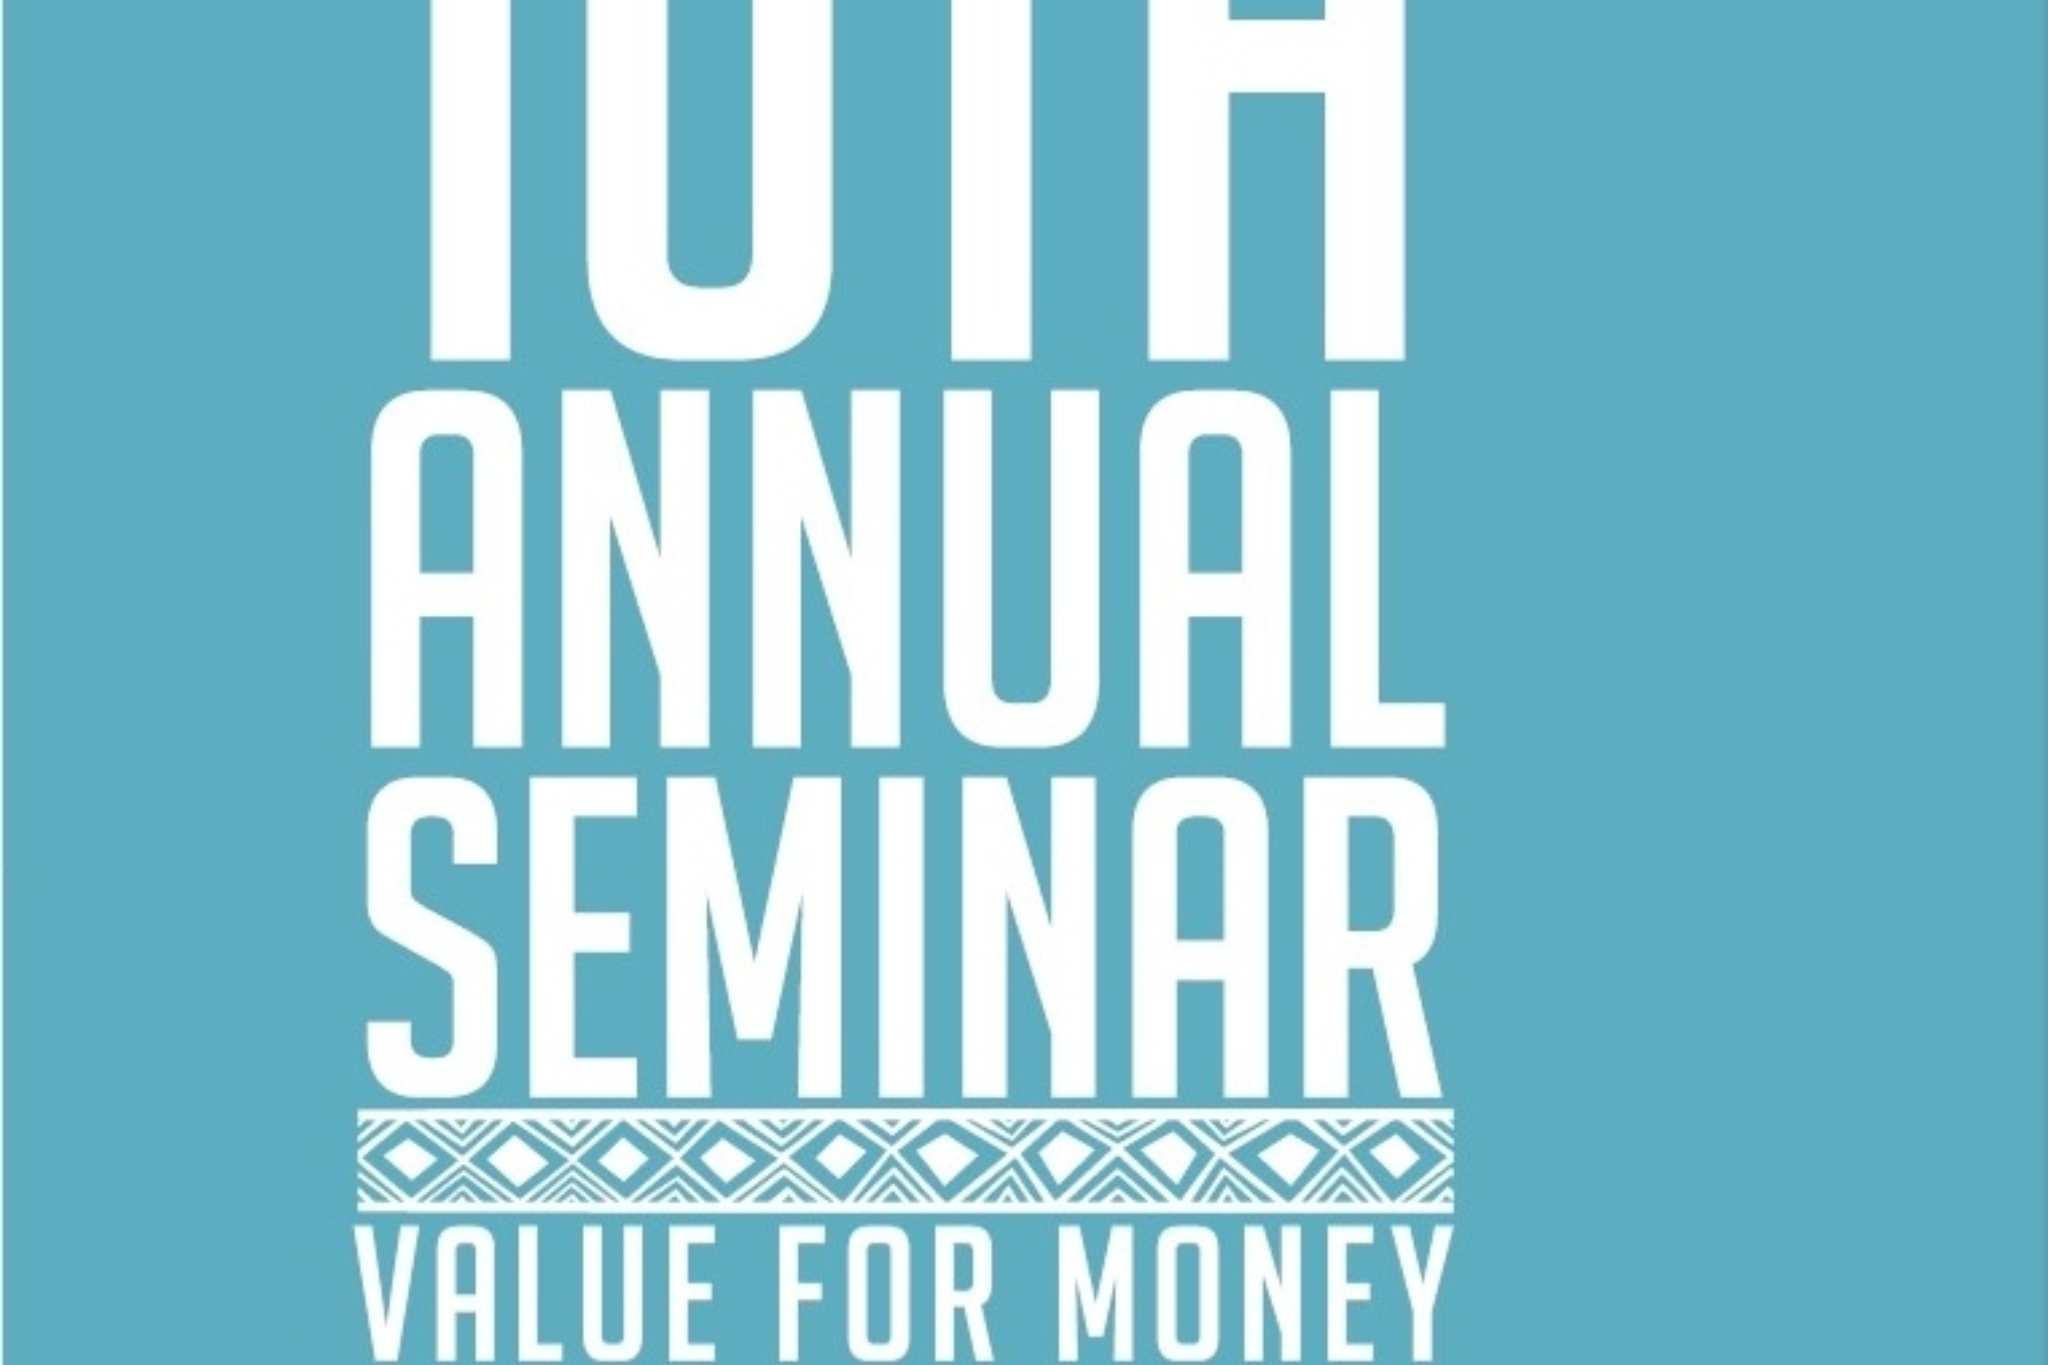 Images Events 10Th Annual Seminar Value For Money In Public Spending